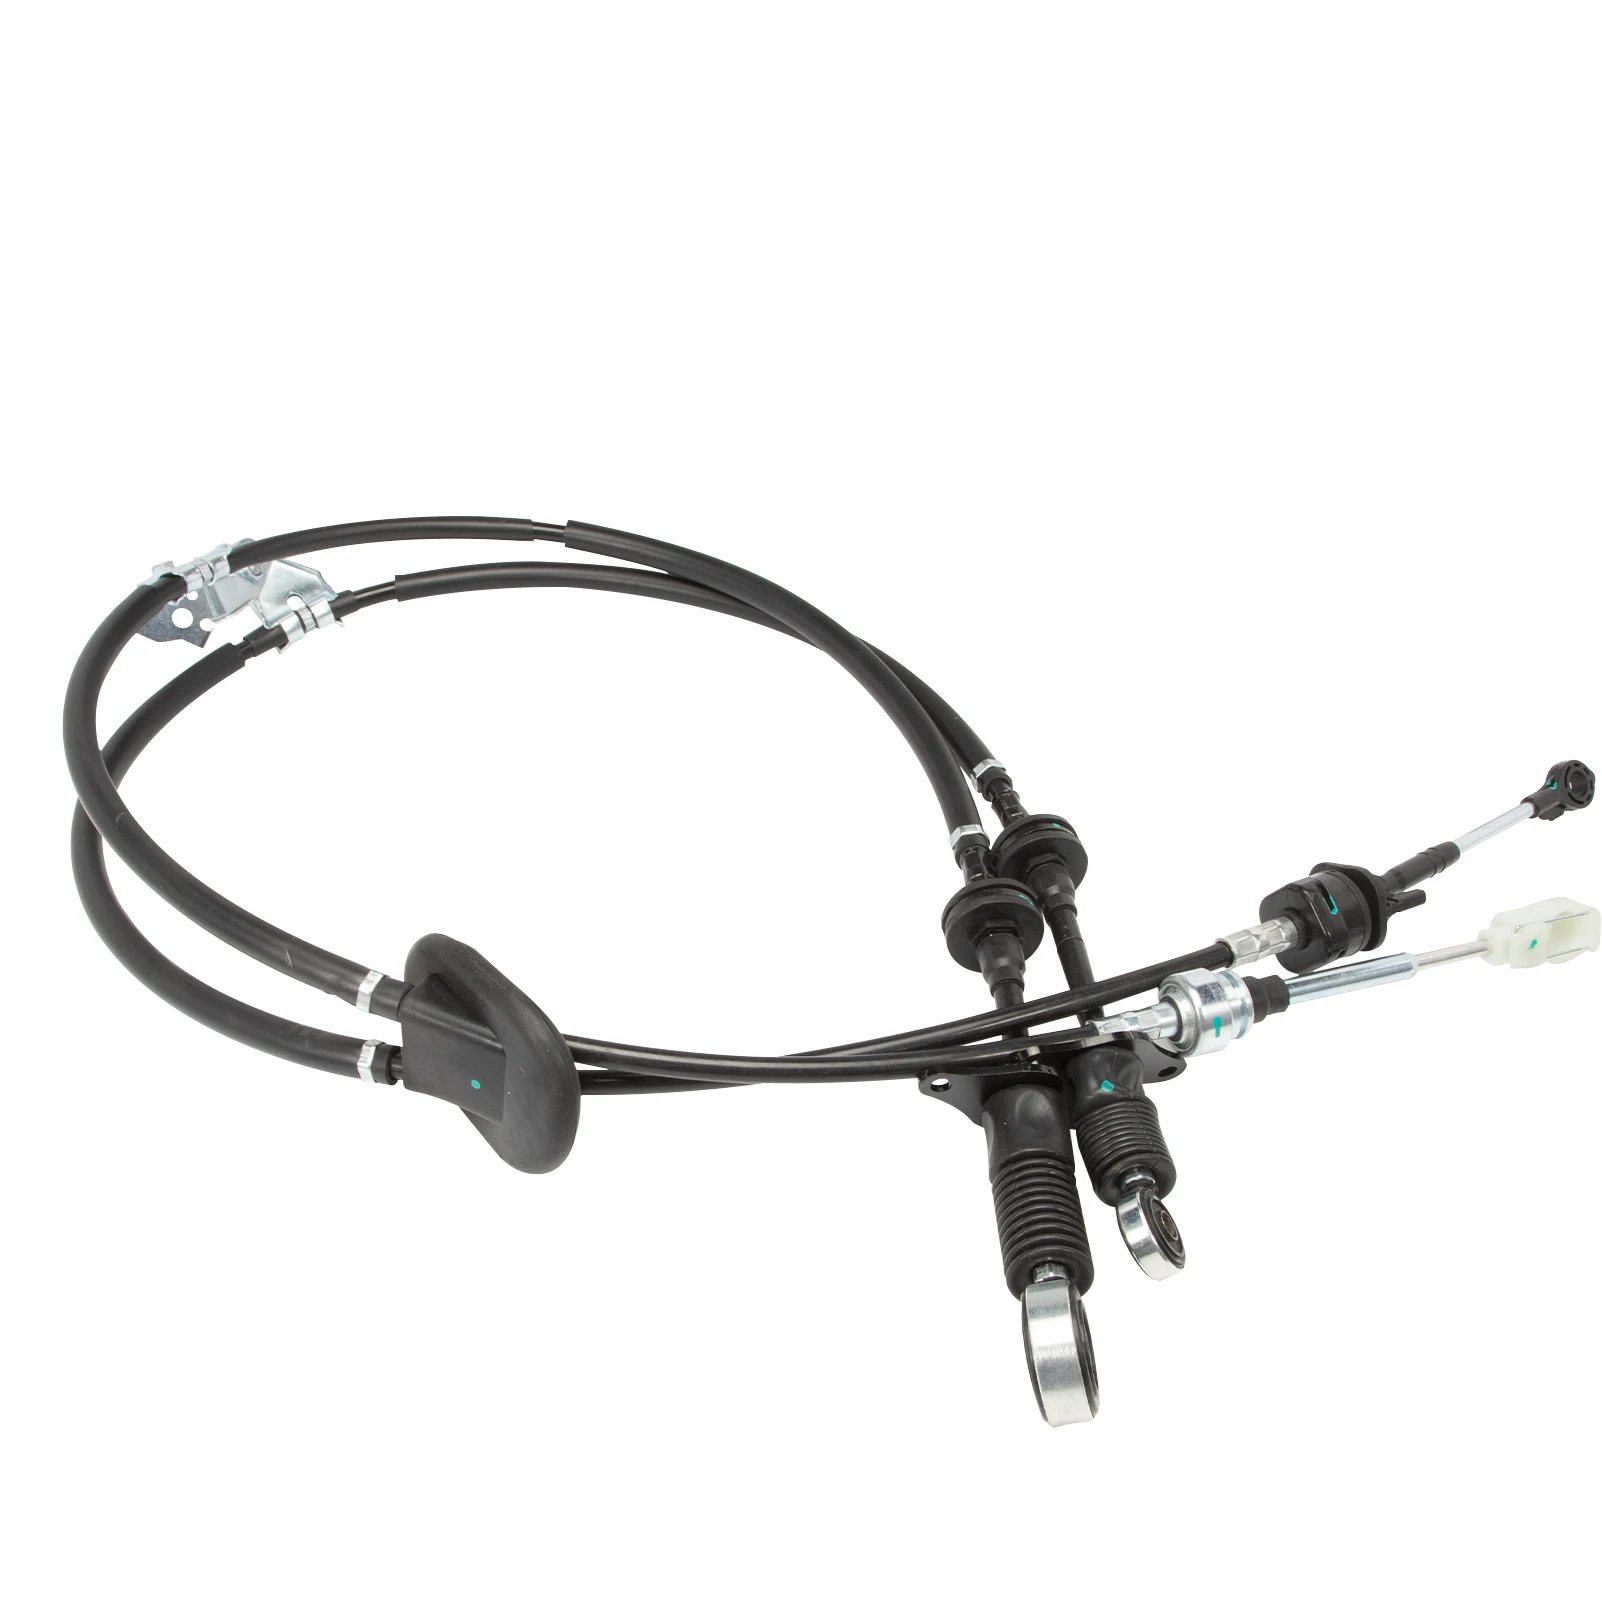 

54310-SDA-L02 Transmission Manual Shifter Cables for Honda Accord 2003-2007 Accord Euro-R 2001-2006 5 or 6 Speed Transmission